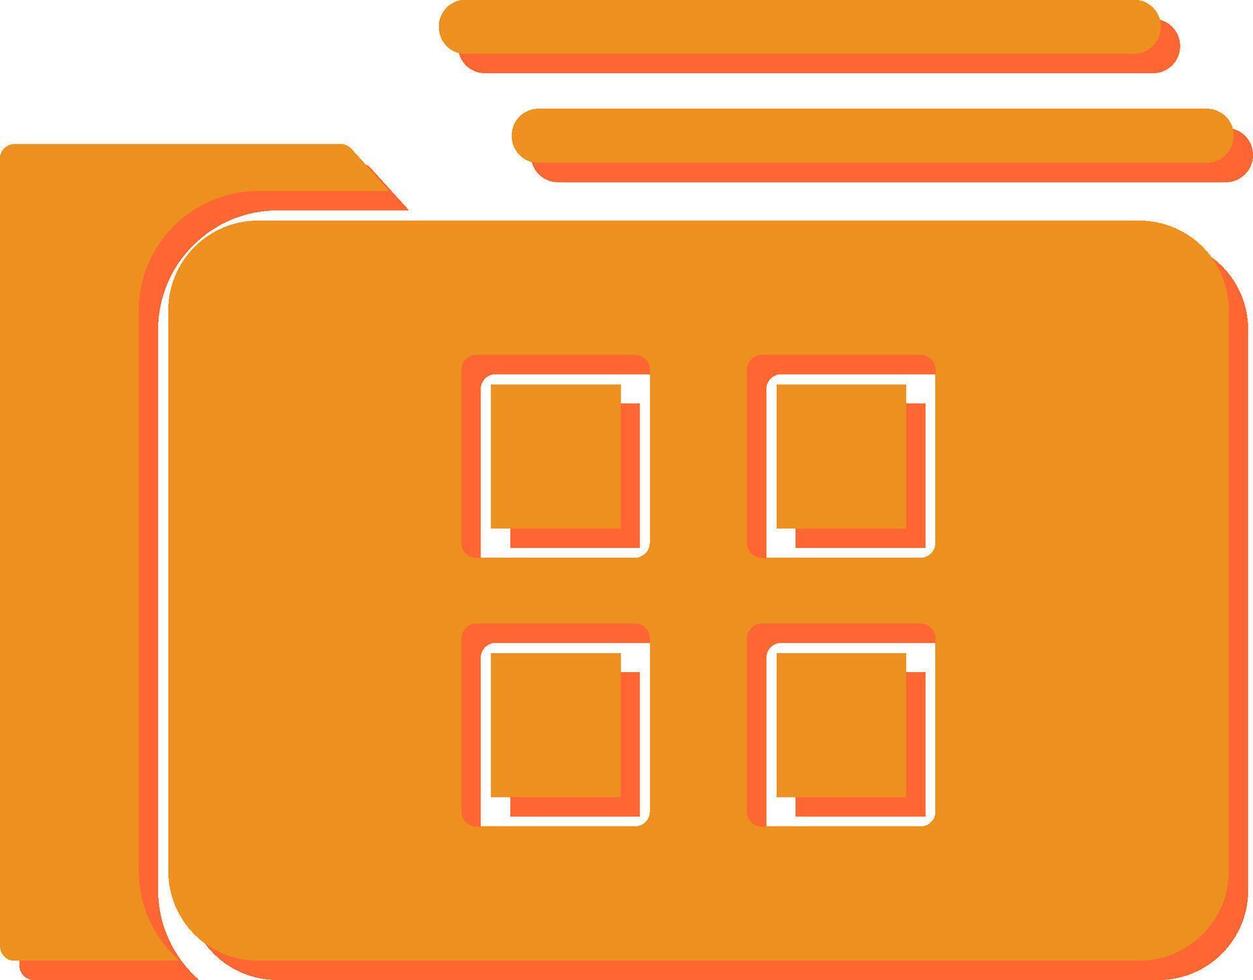 File Management Vector Icon